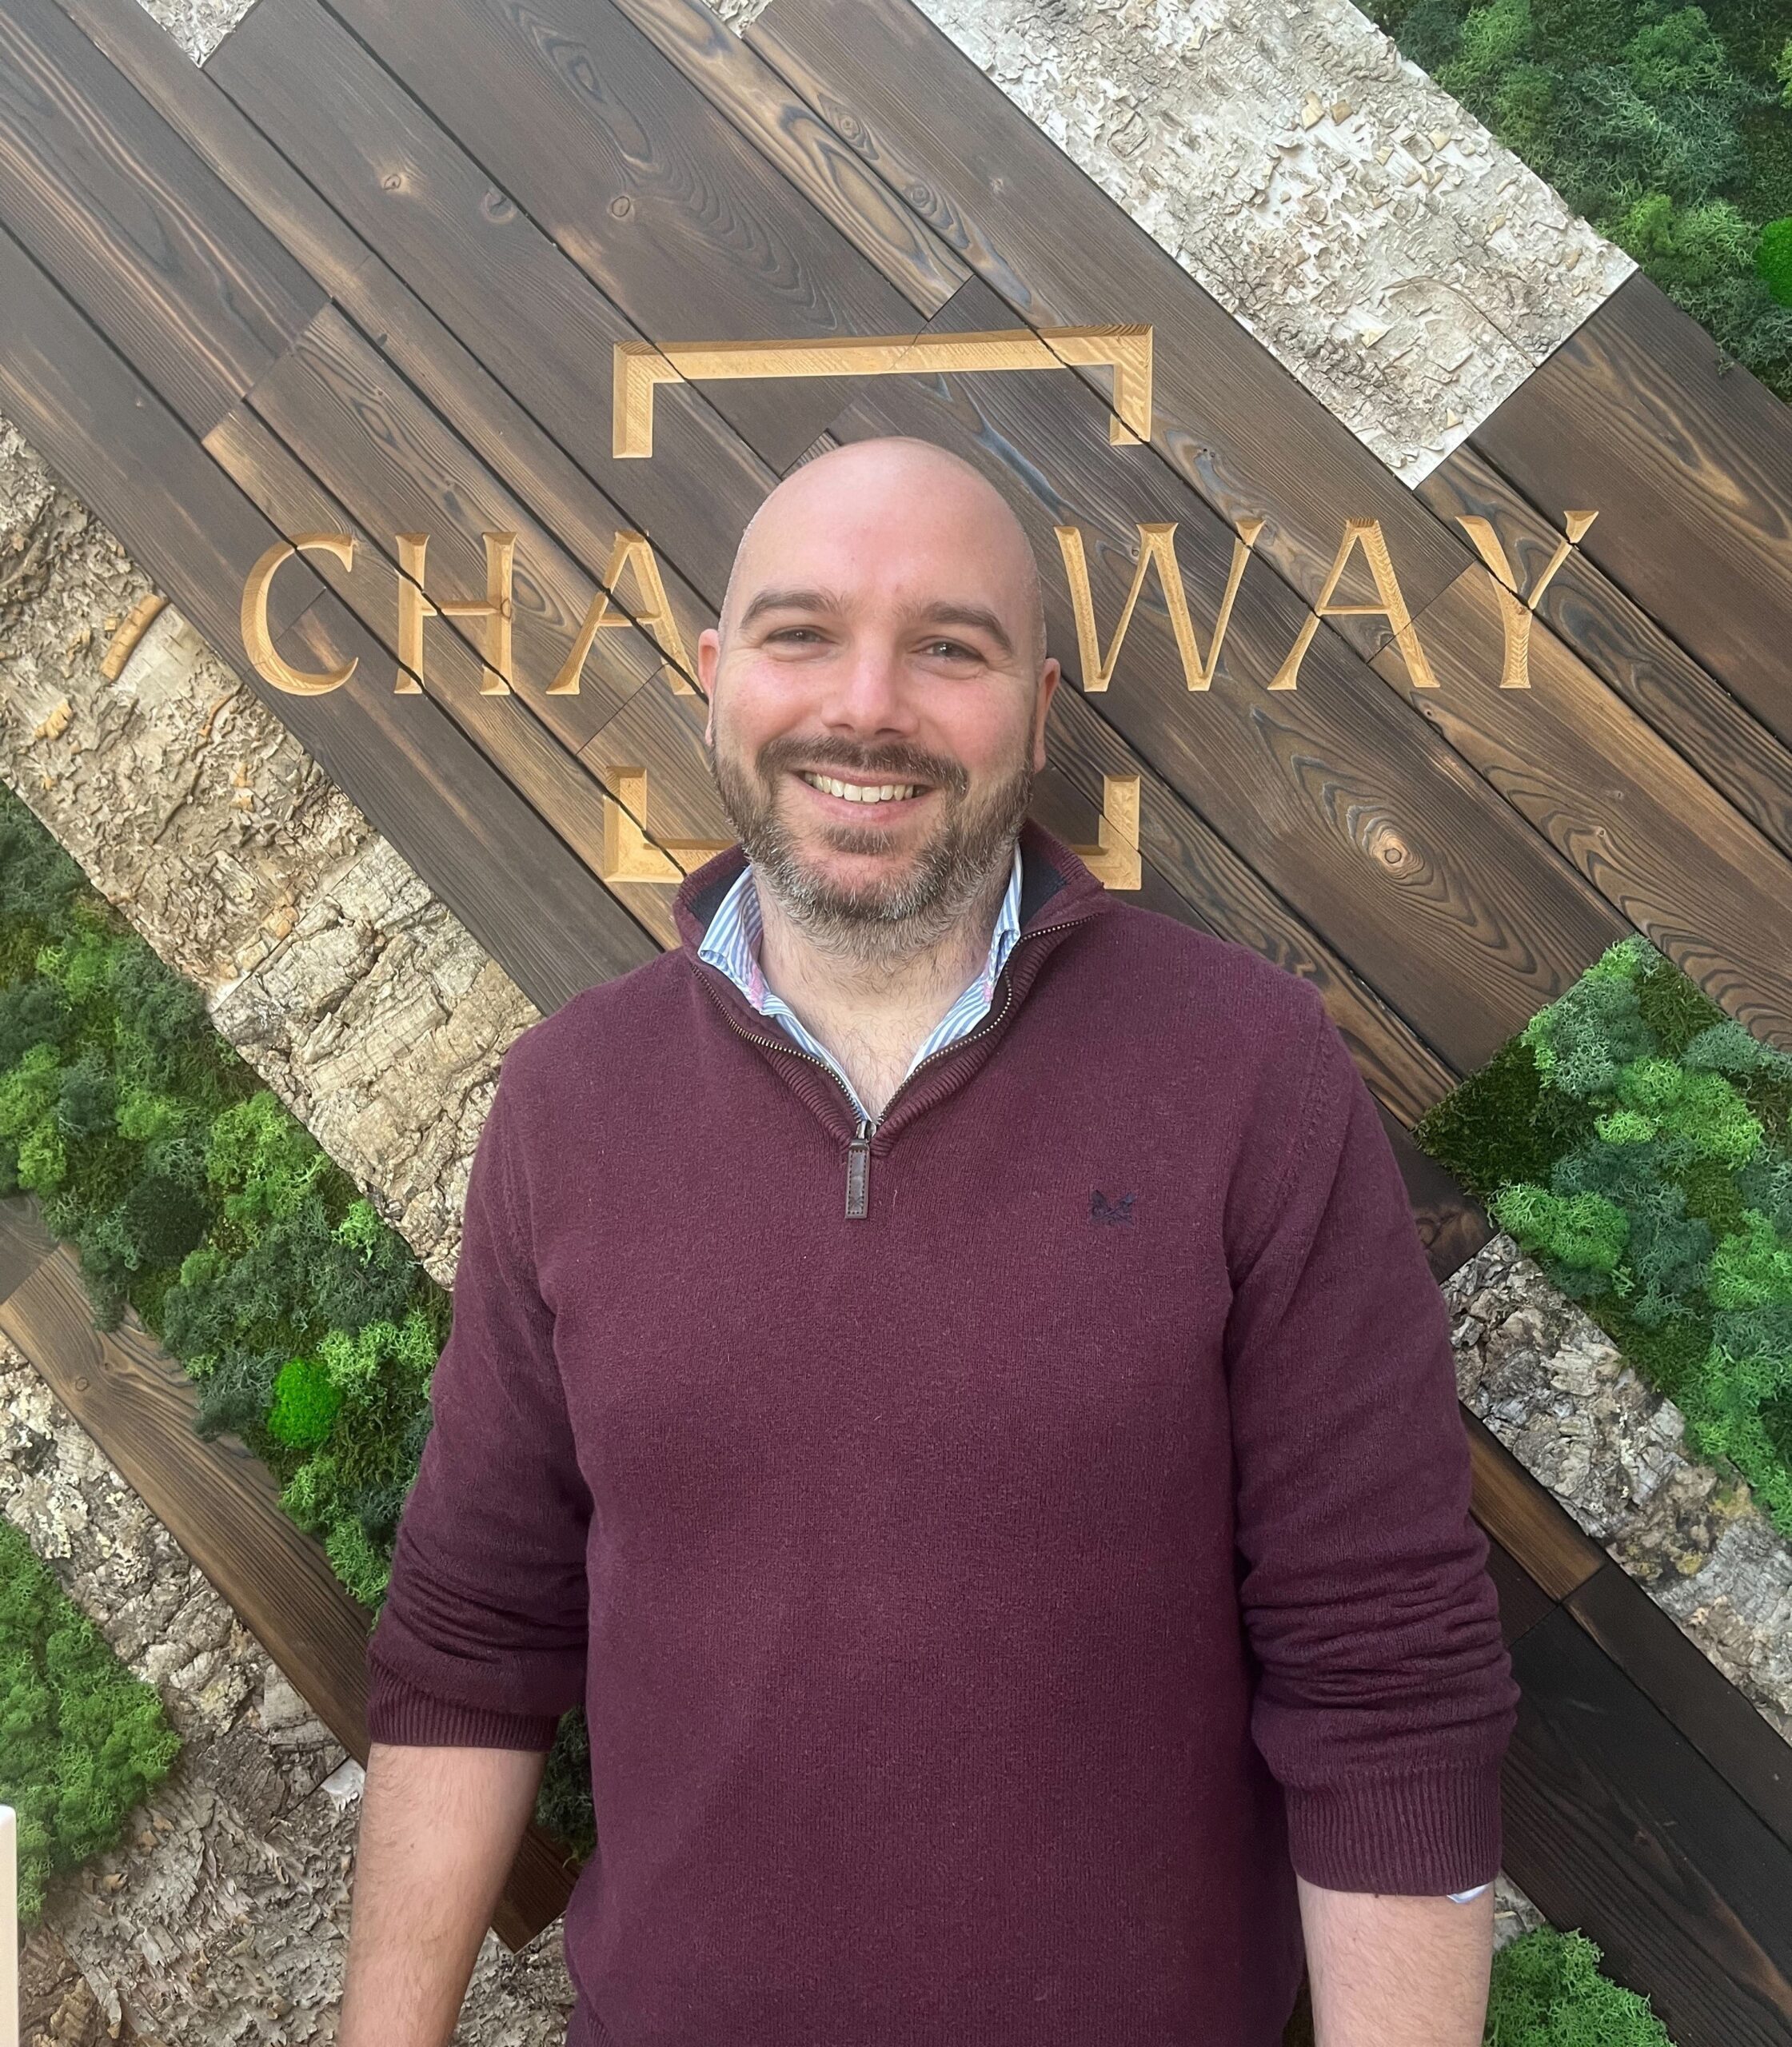 Chartway Partnerships Group appoint Marc Wells as new Commercial Director